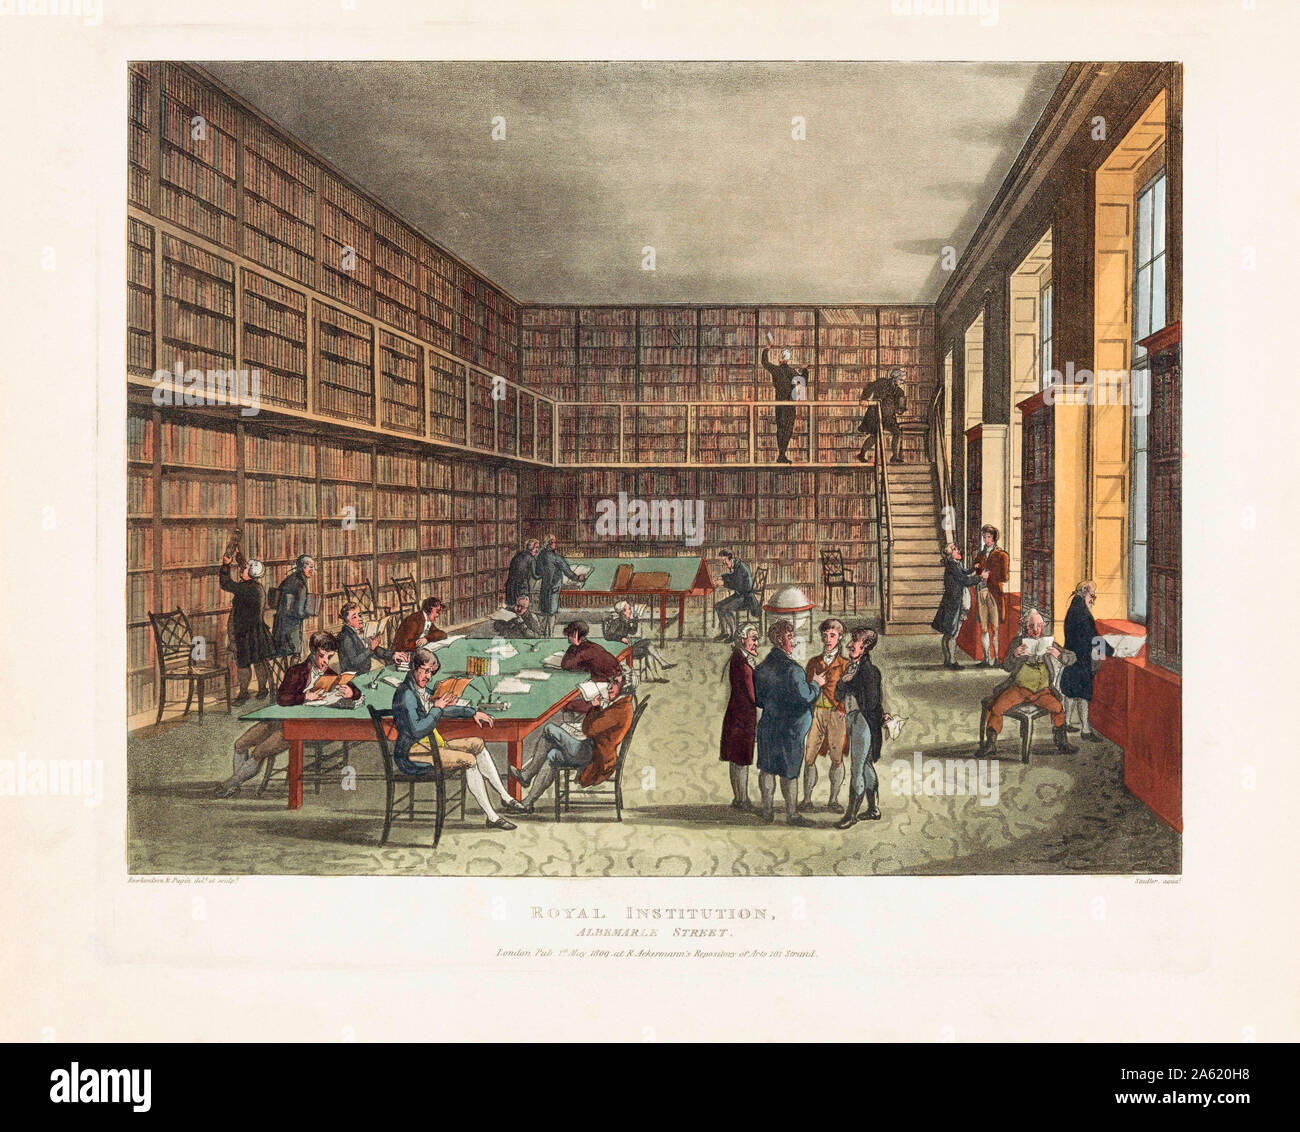 The Royal Institution Library, Albemarle Street, London.  After an engraving dated 1809.  Later colourization. Stock Photo